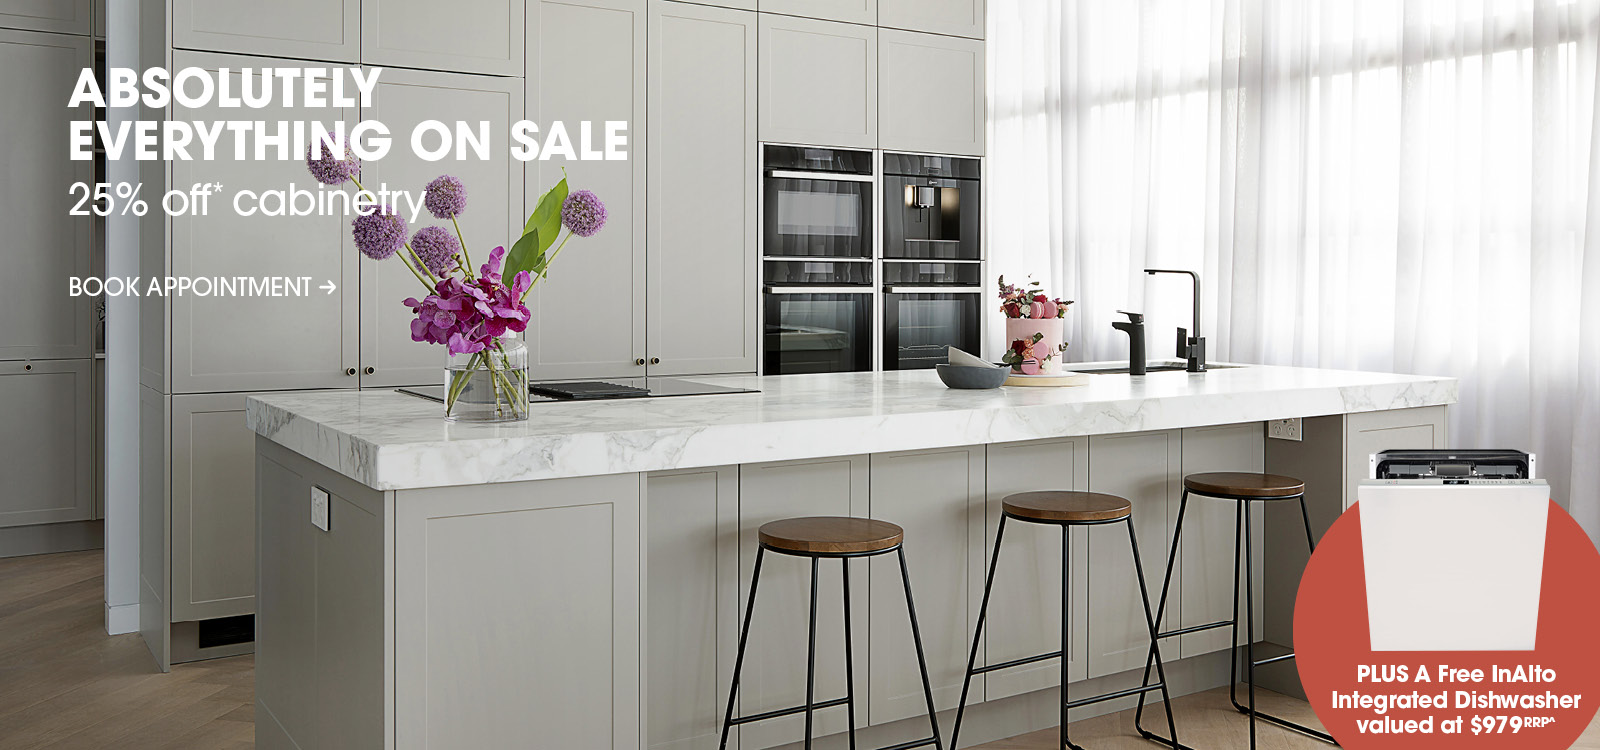 Freedom Kitchens - Absolutely Everything on Sale offer + Receive a Free Dishwasher